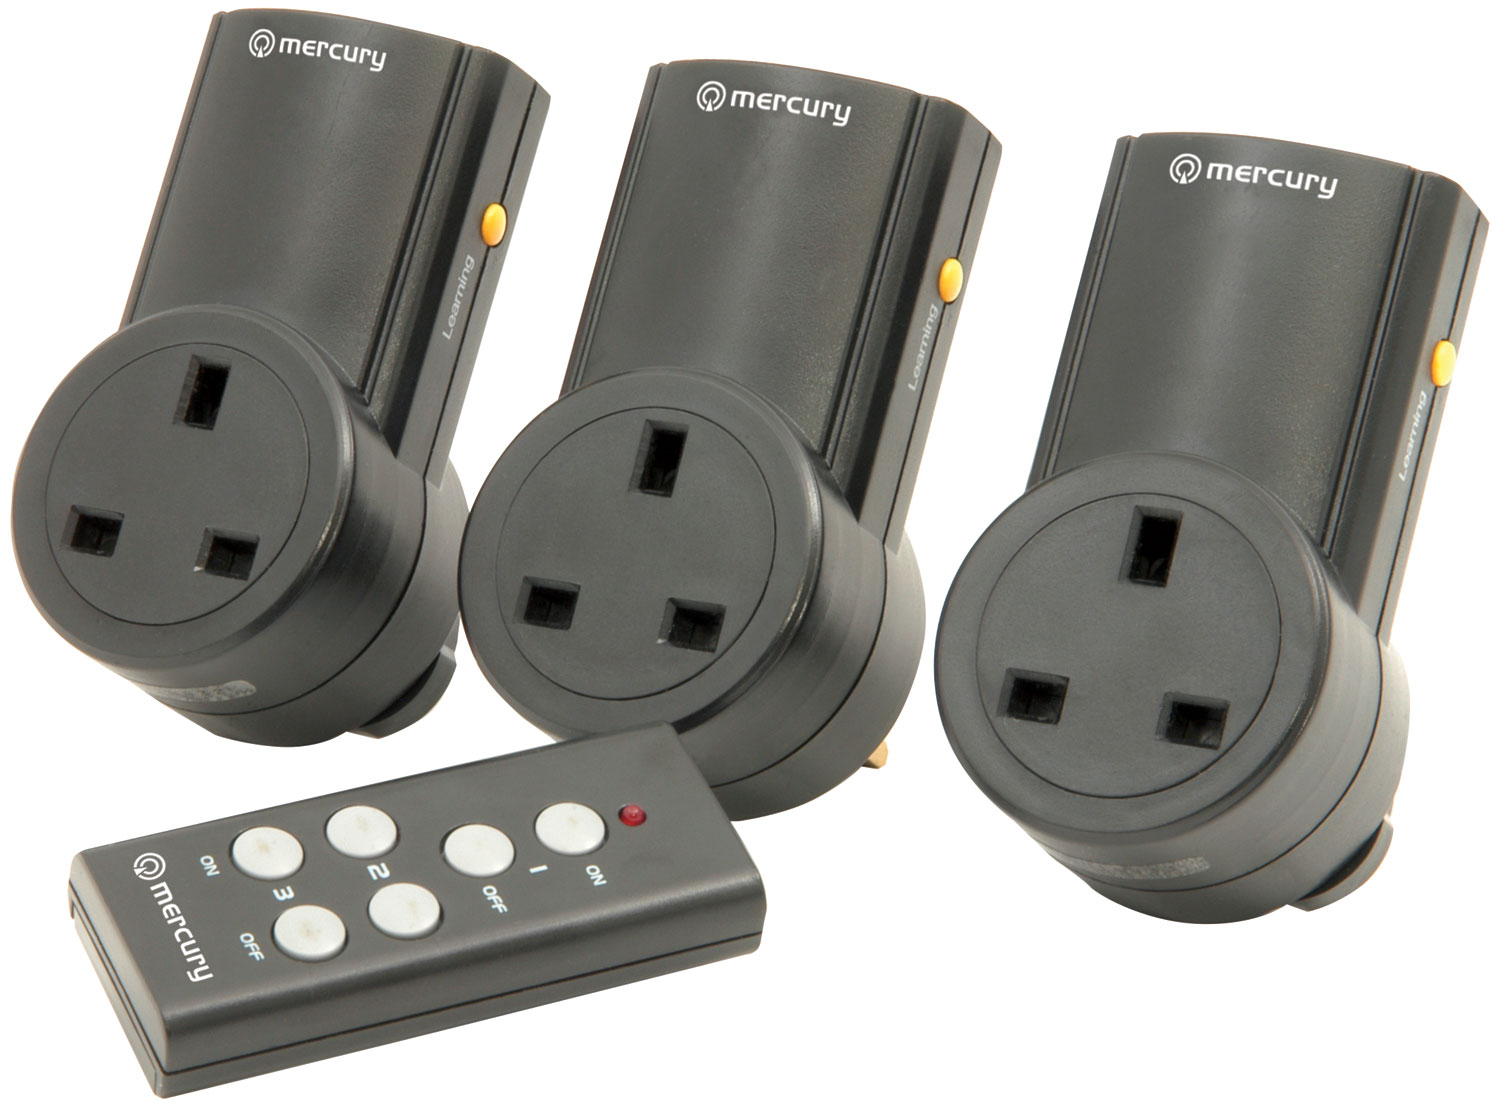 Wireless Remote Control Mains Sockets - Set of 3 RC3 Set of 3 RF controlled socket